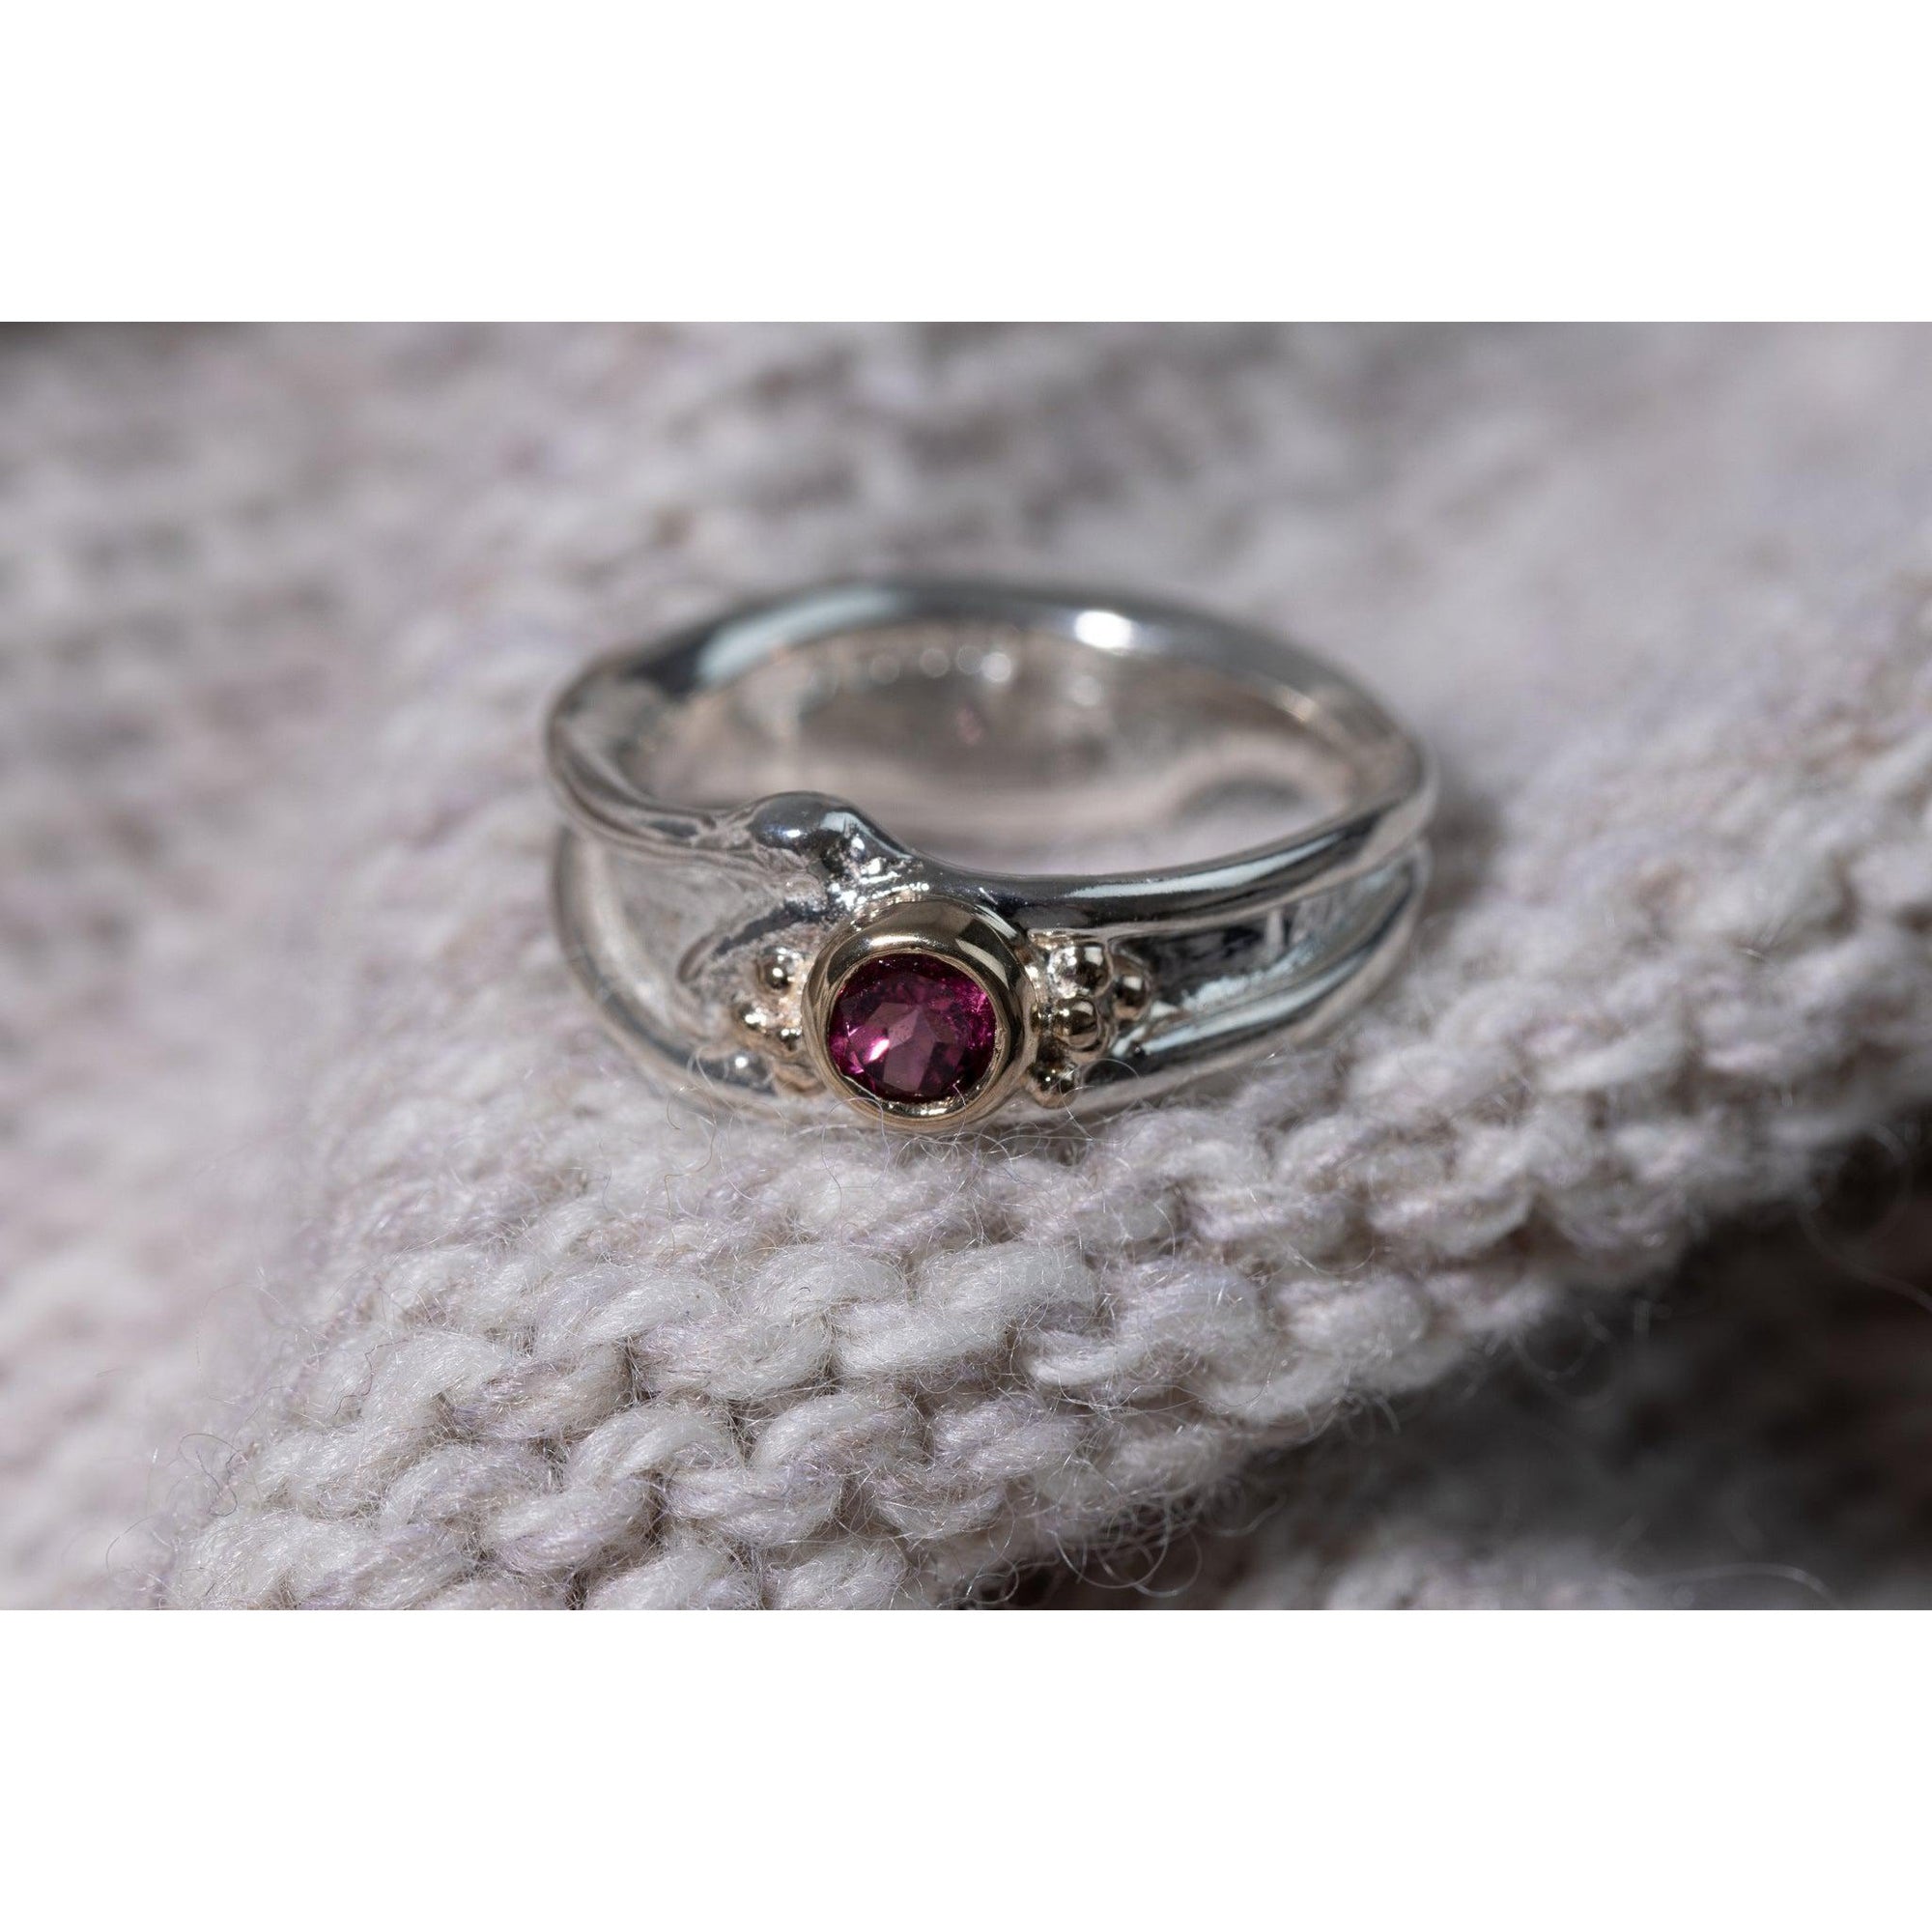 'LG58 - Silver Ring with 9ct Gold 4mm Rhodalite ' by Les Grimshaw, available at Padstow Gallery, Cornwall